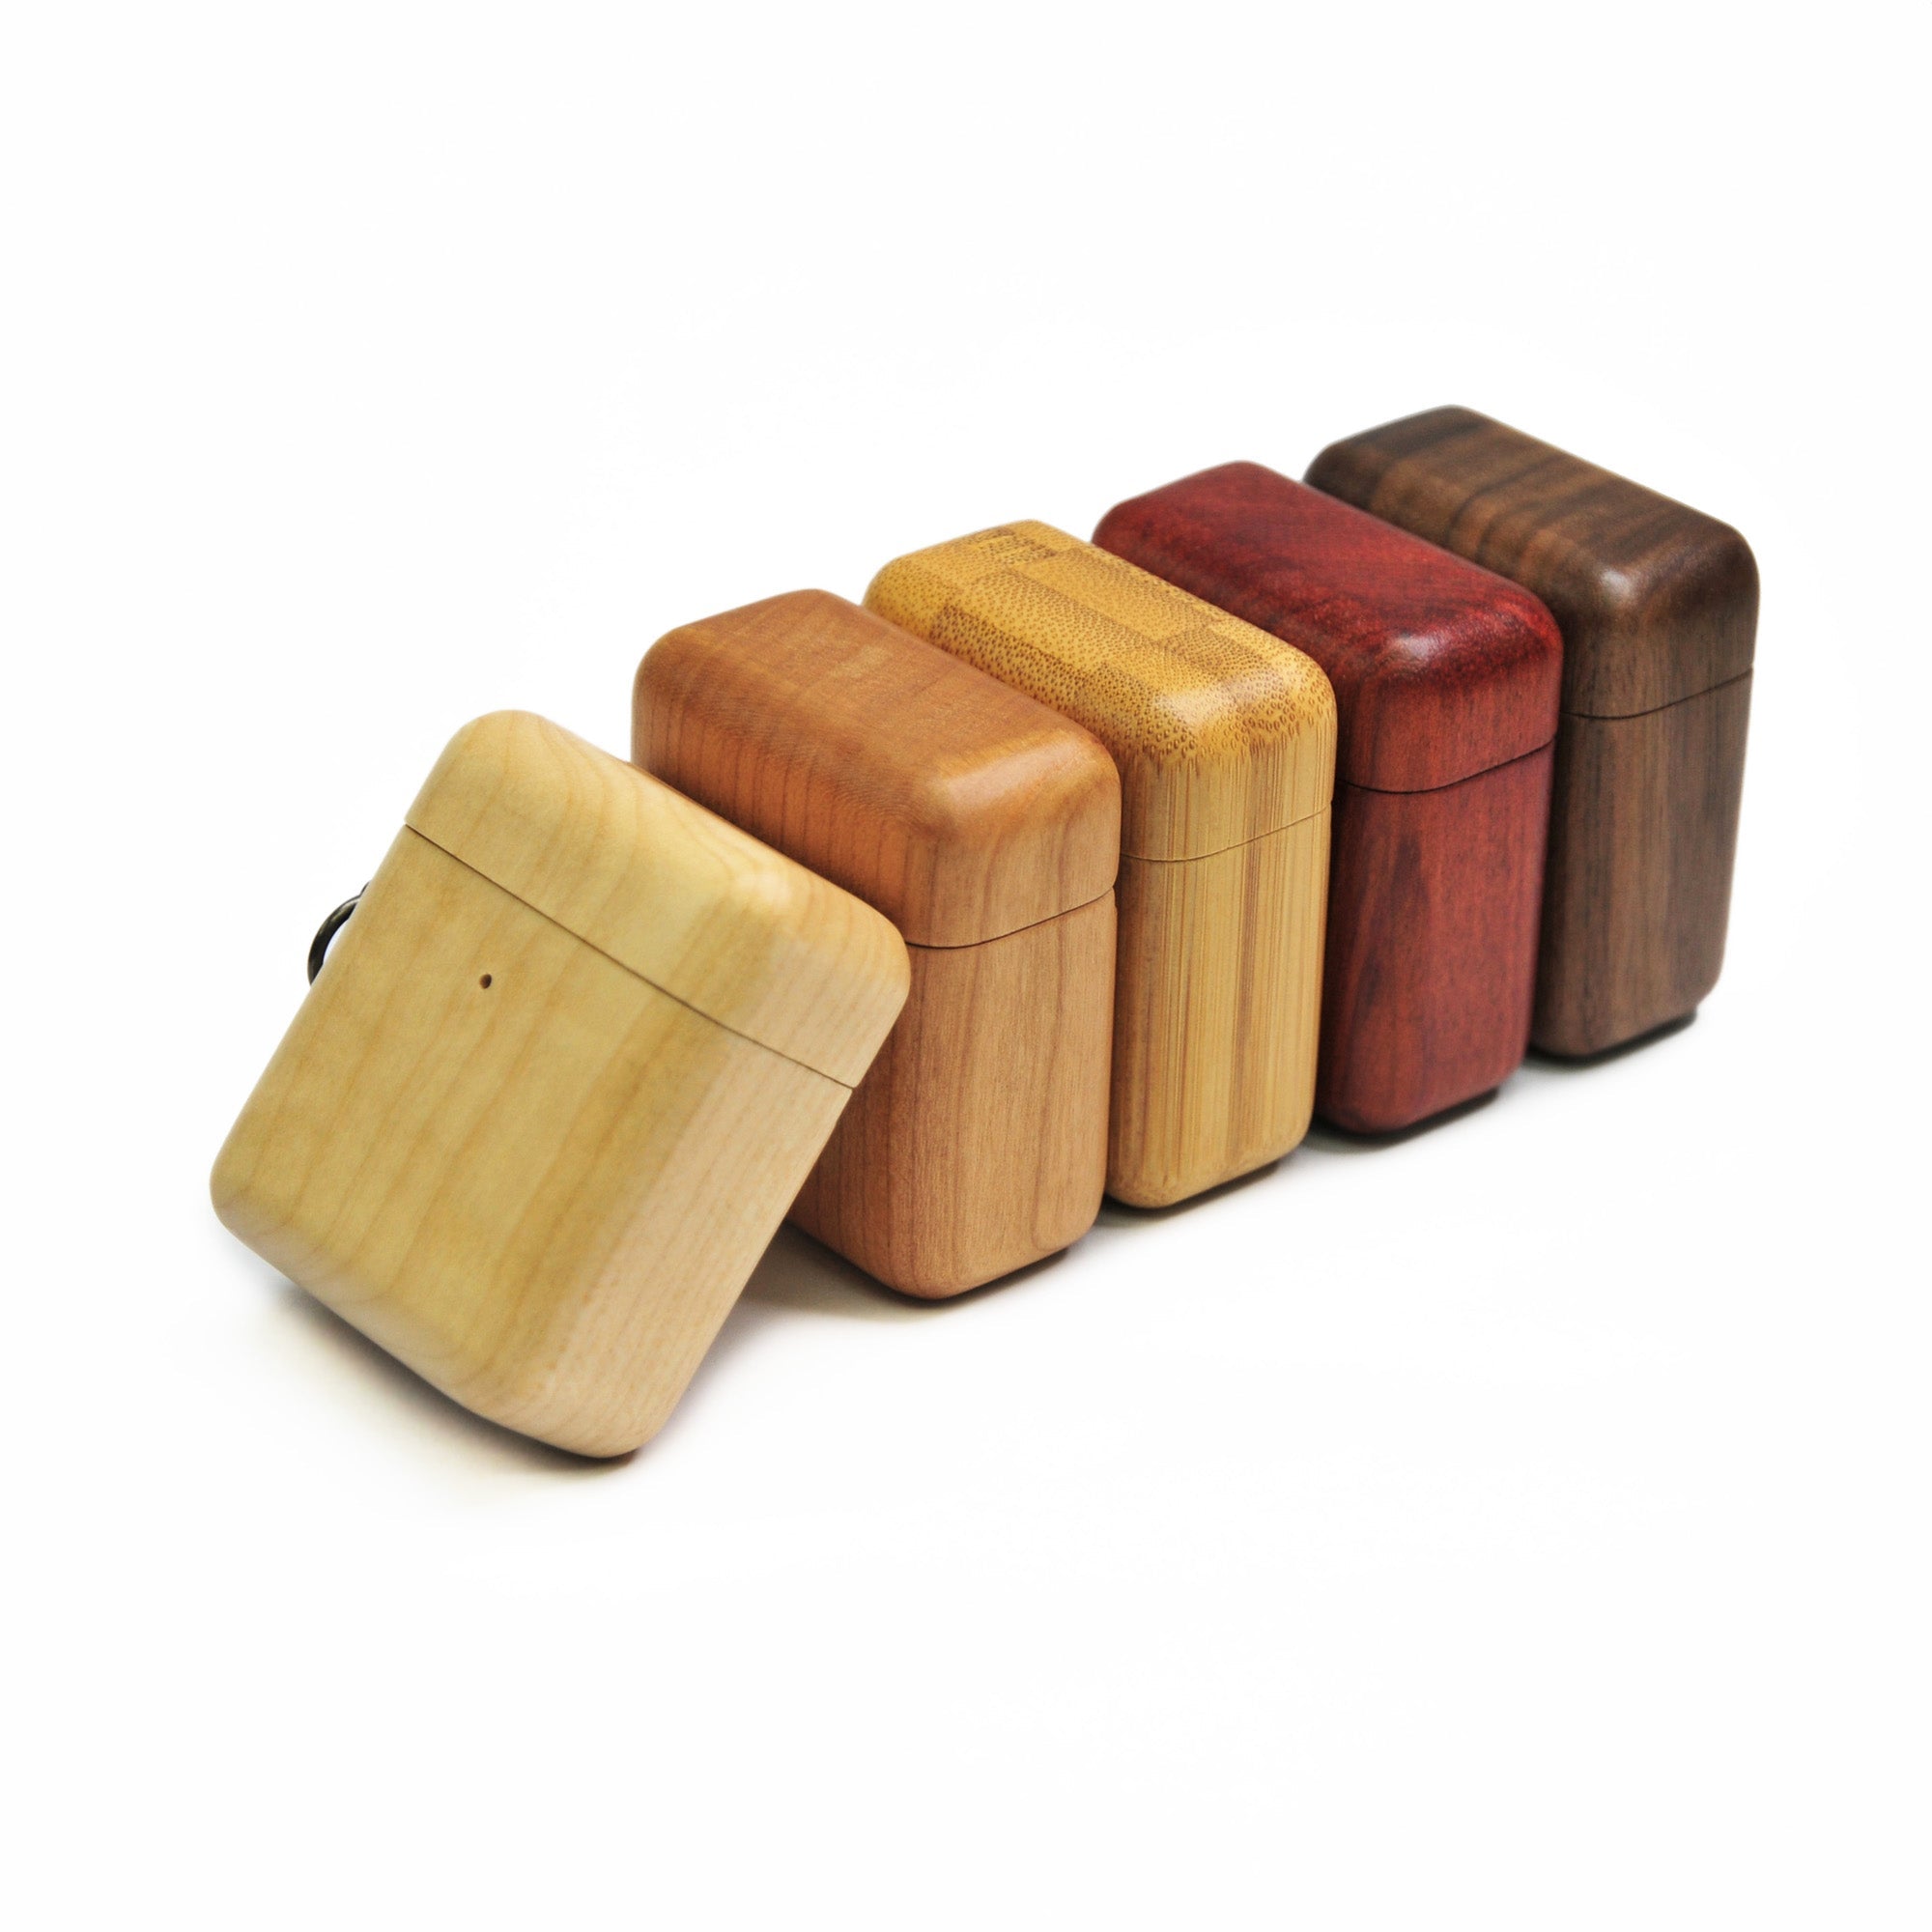 5 types of Wood AirPod Case 1st and 2nd Generation